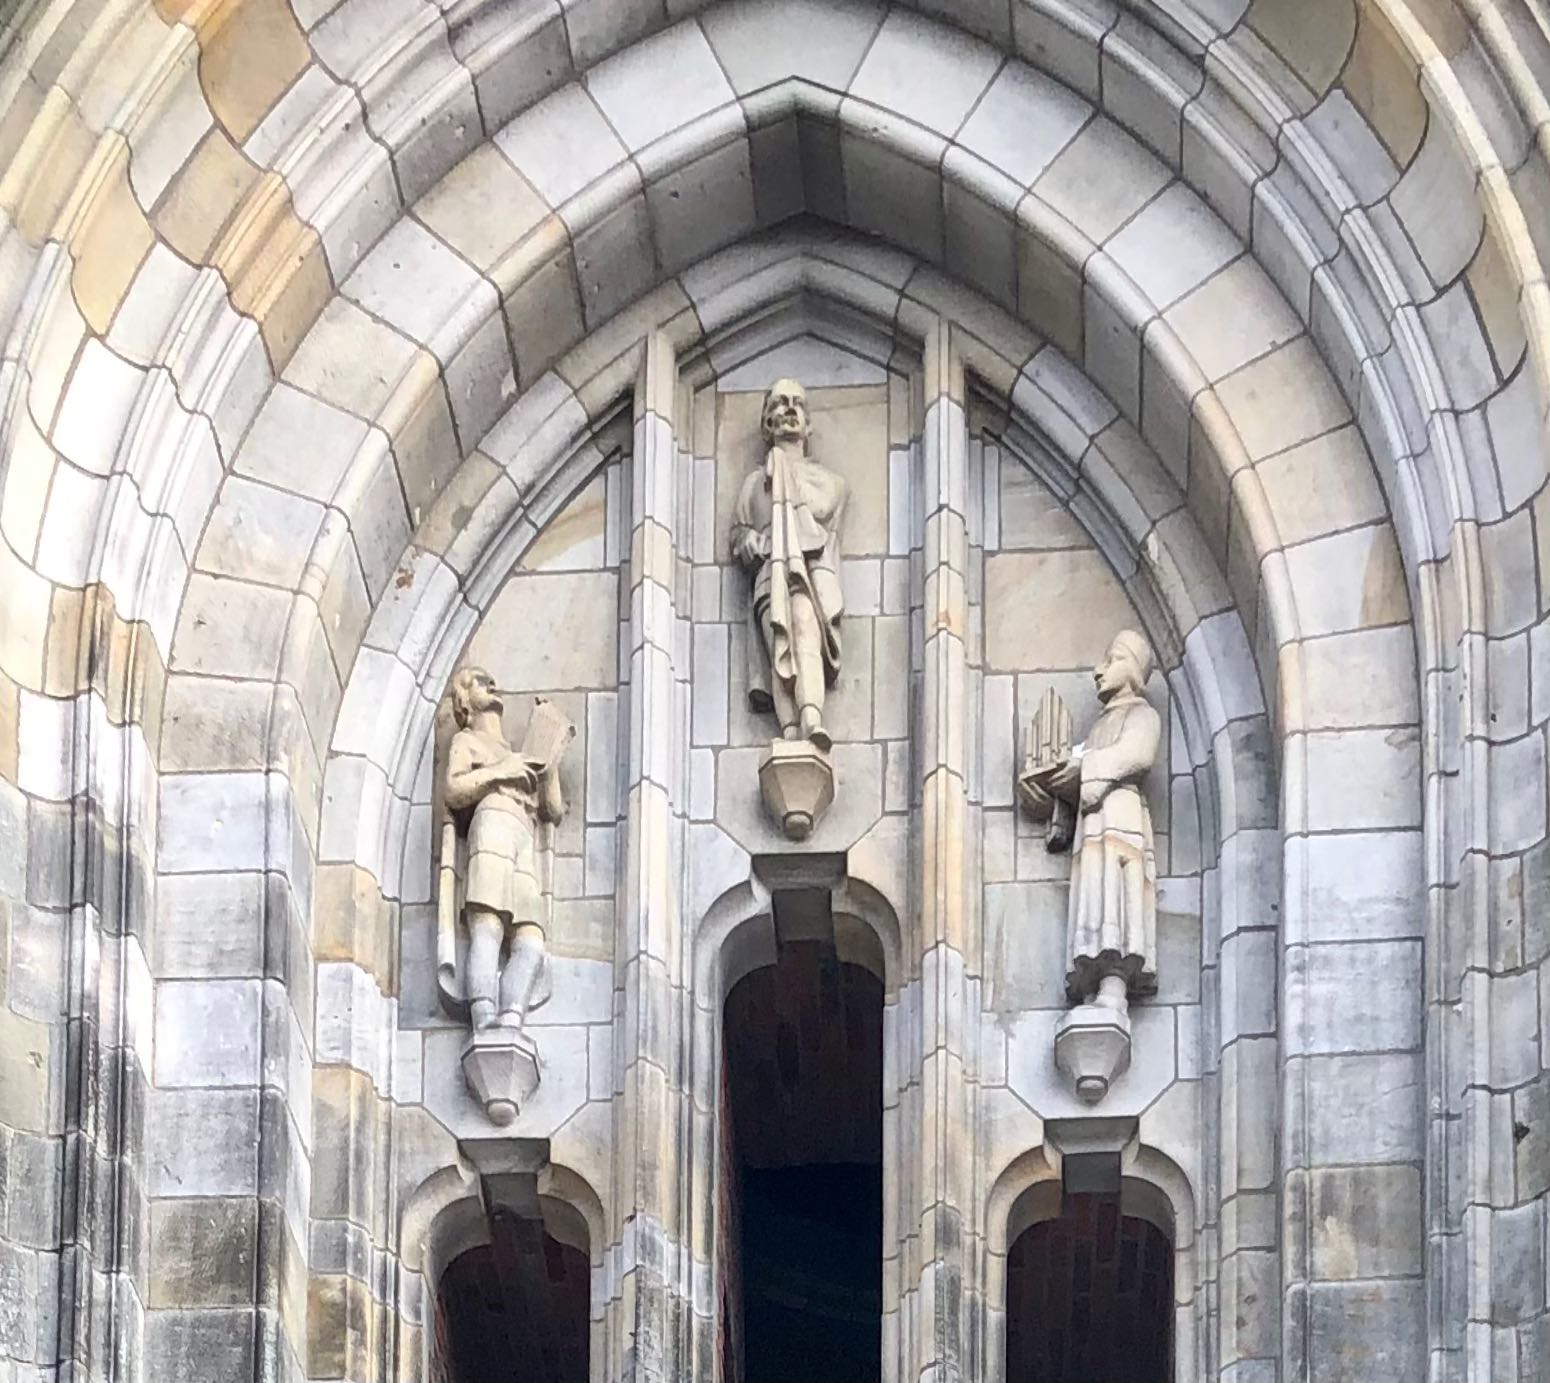 From left to right: Bernlef (with lyre), St Martin (with cape) and Agricola (with organ) above the western portal of the Martini Tower in Groningen (Willem Valk, 1940, sandstone)